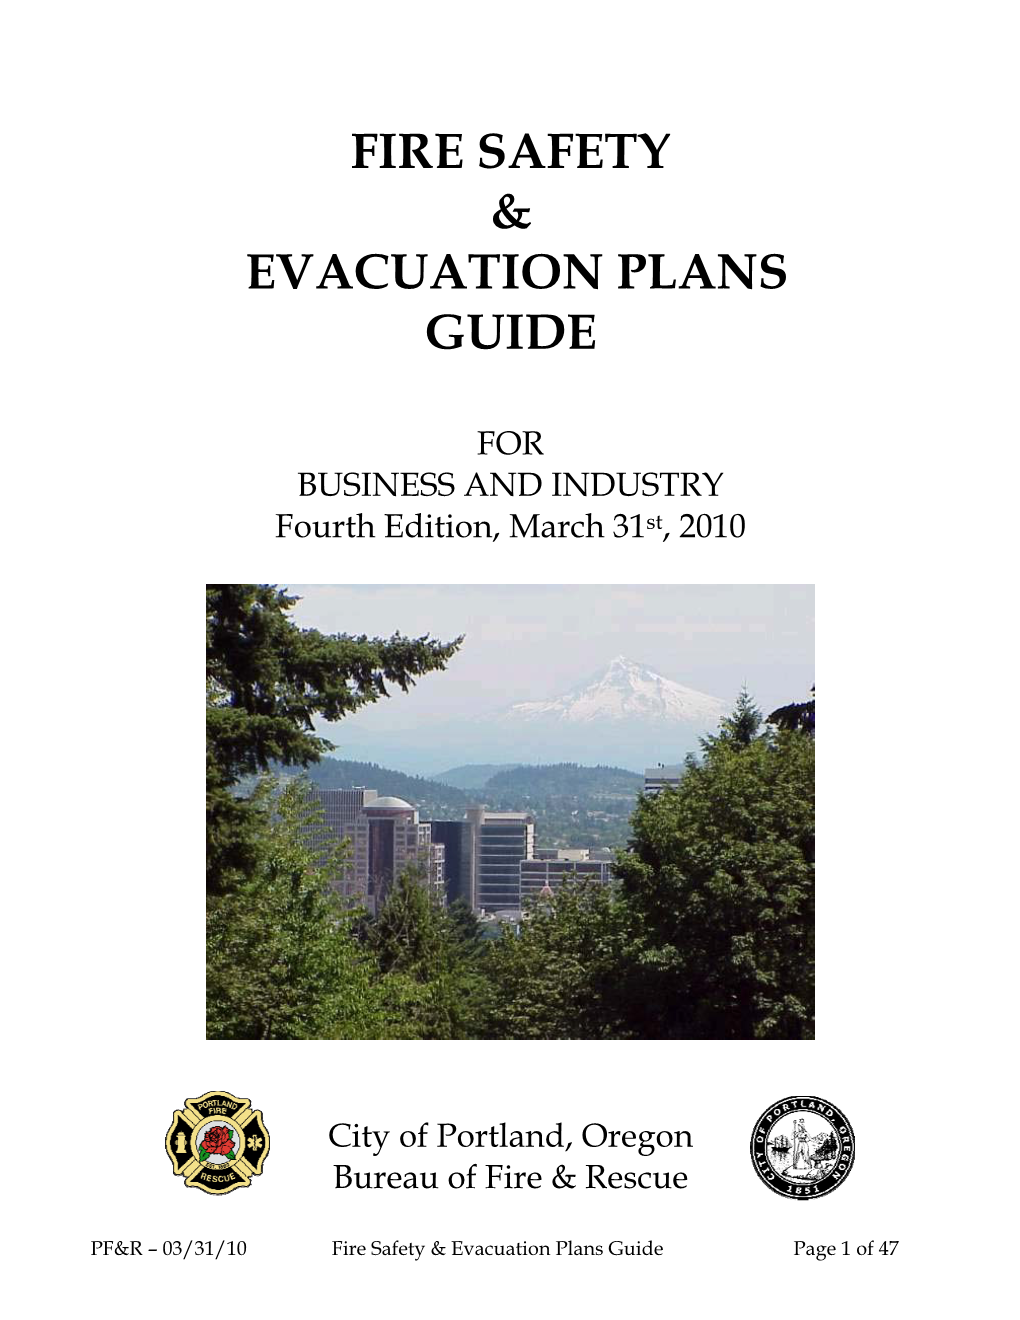 Fire Safety & Evacuation Plans Guide